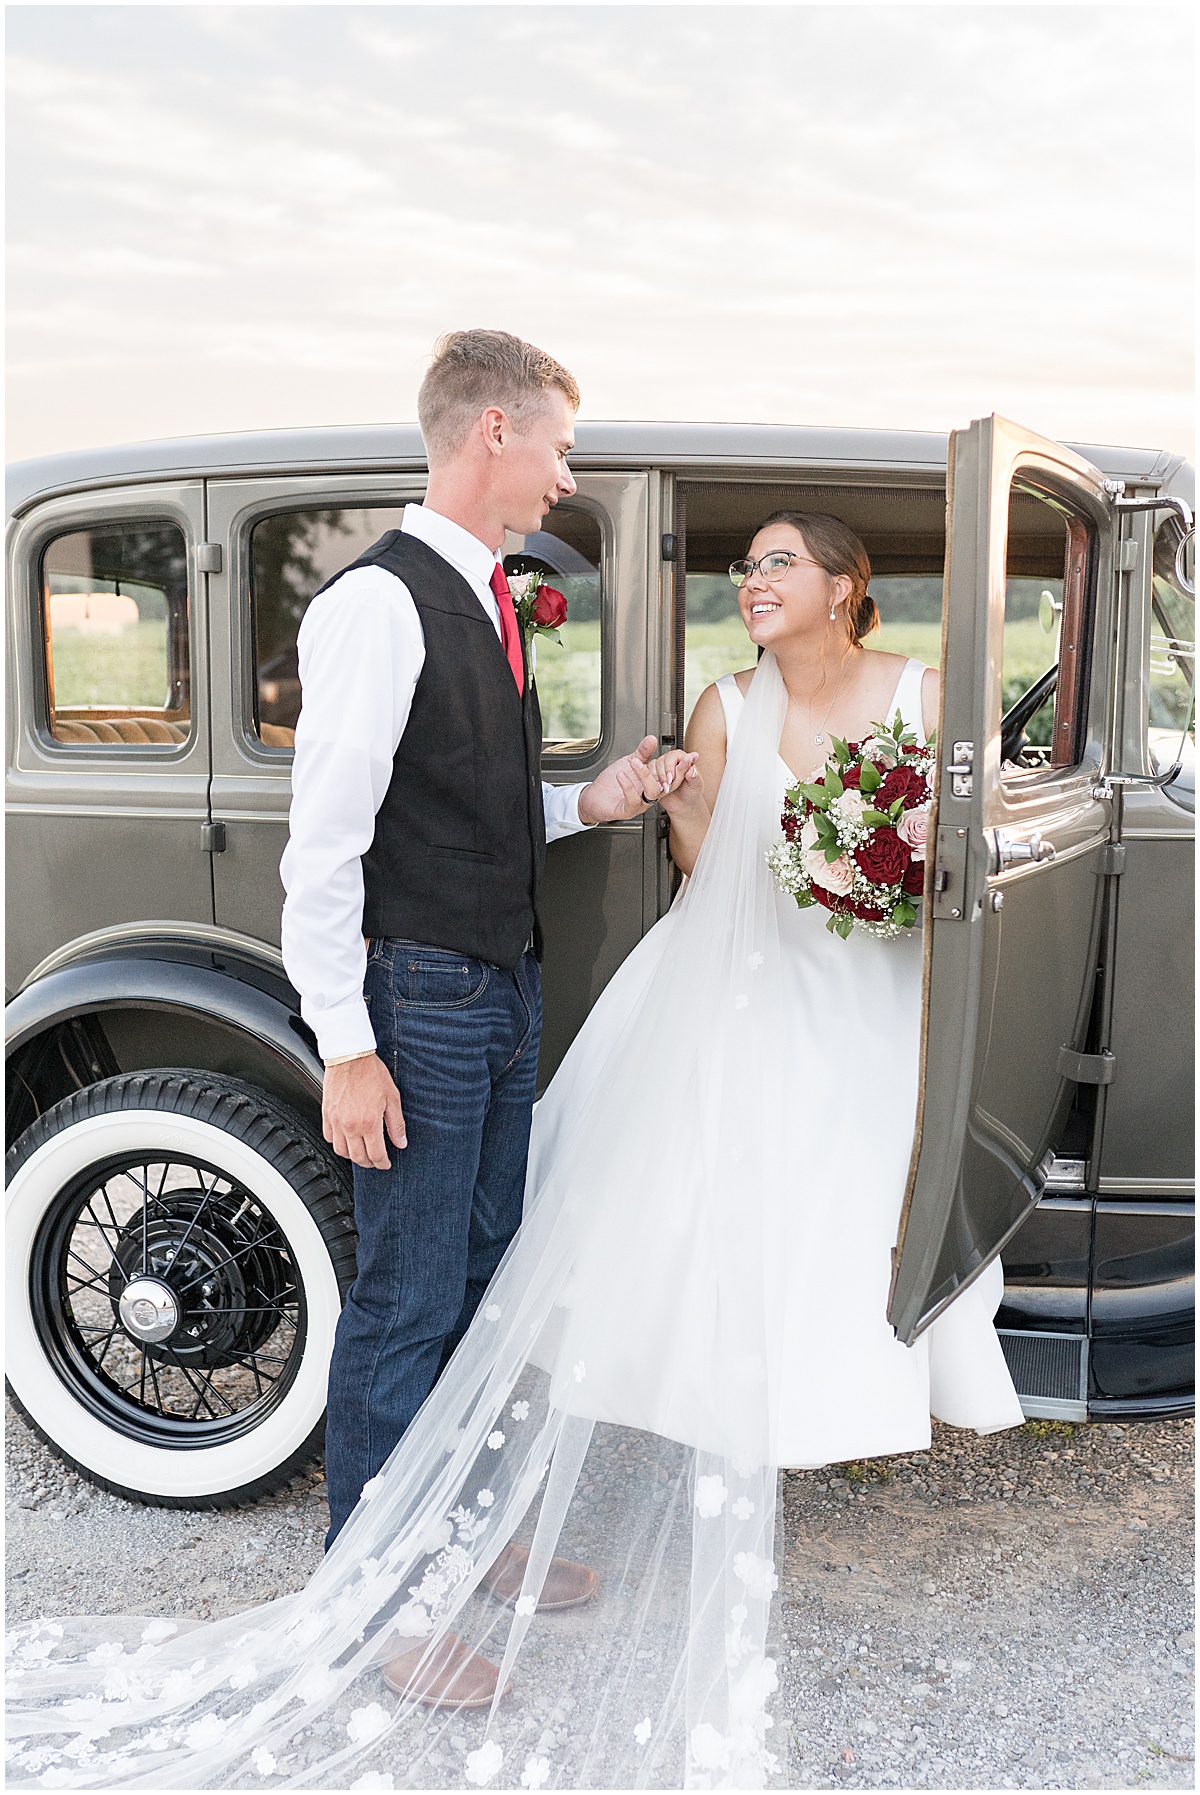 Groom helps bride get out of vintage car at Churchill Farms wedding in Lake Village, Indiana photographed by Victoria Rayburn Photography